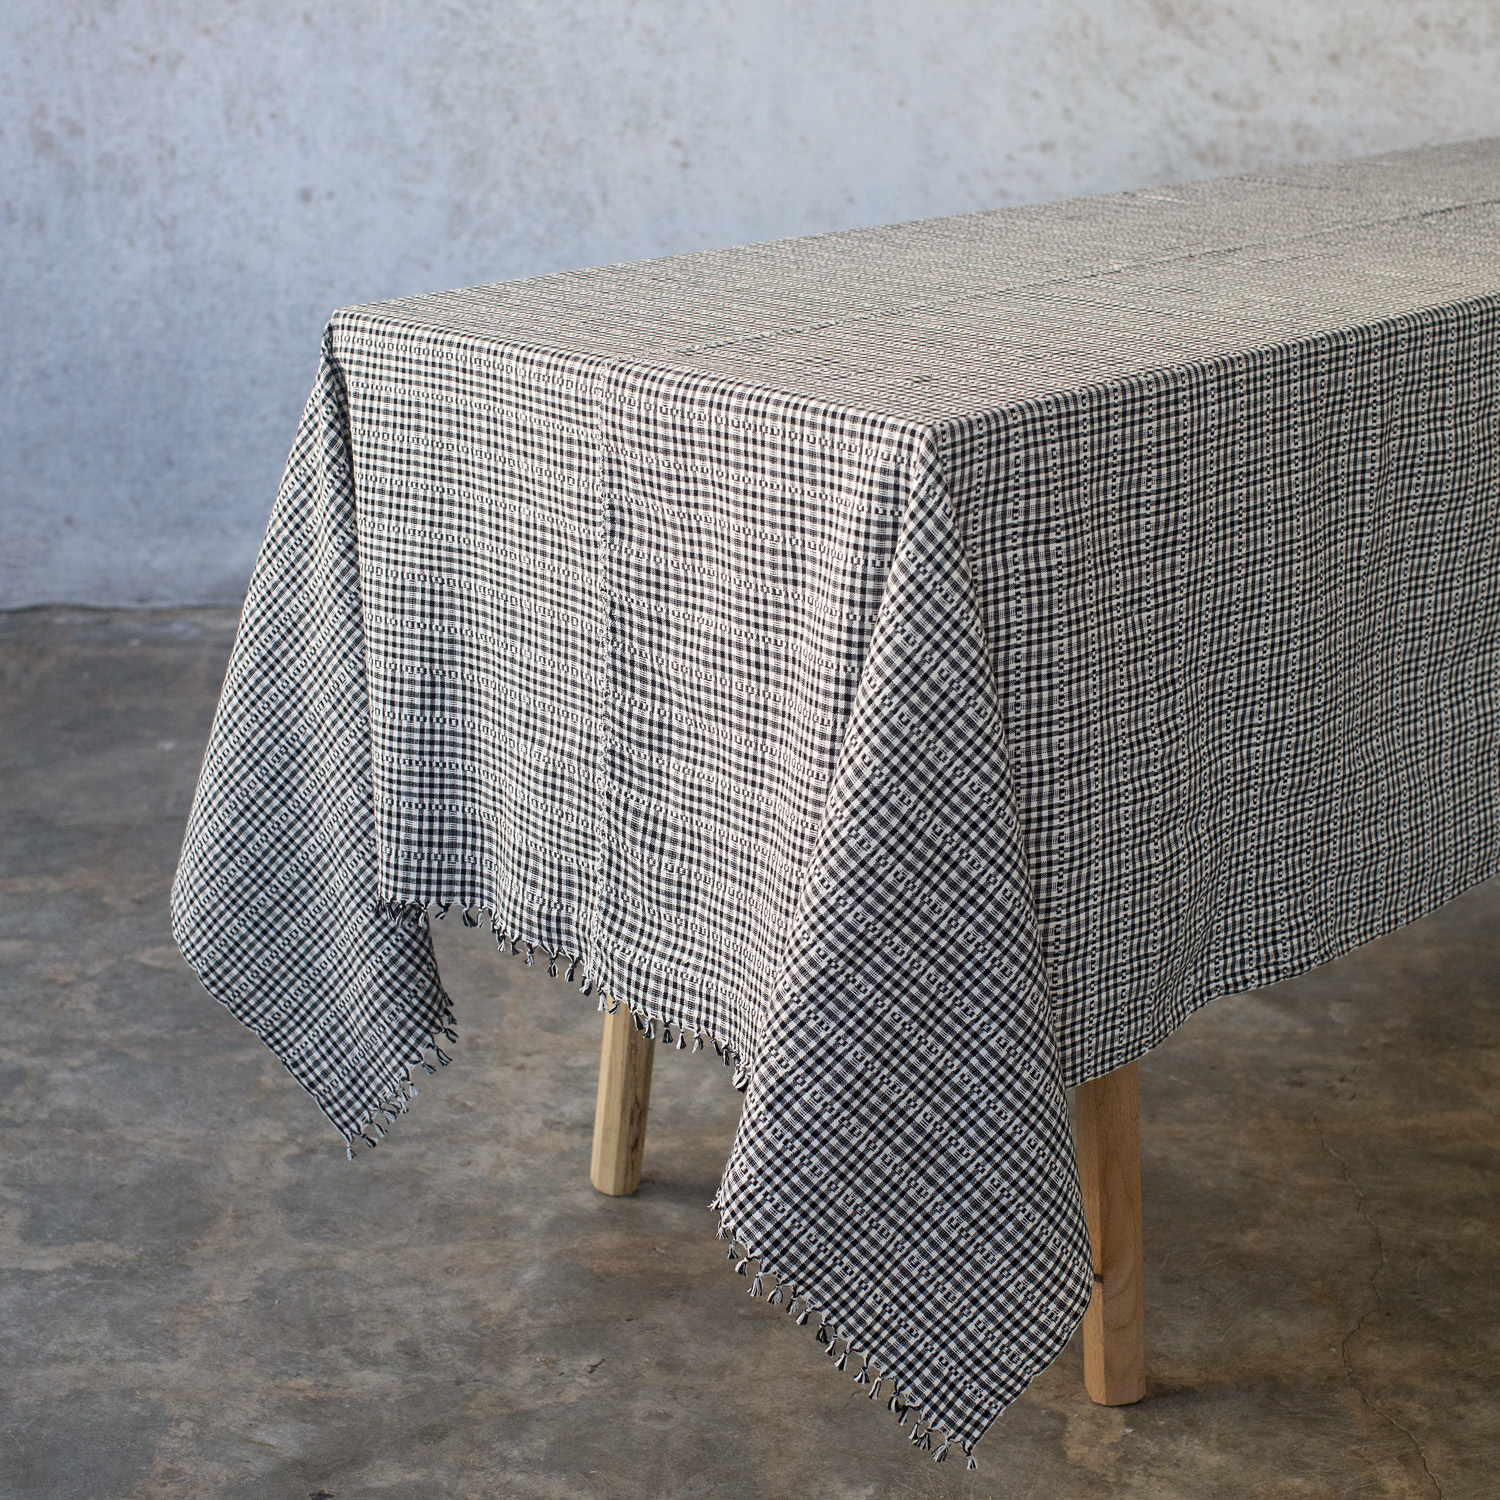 Soho Tablecloth $196 and up